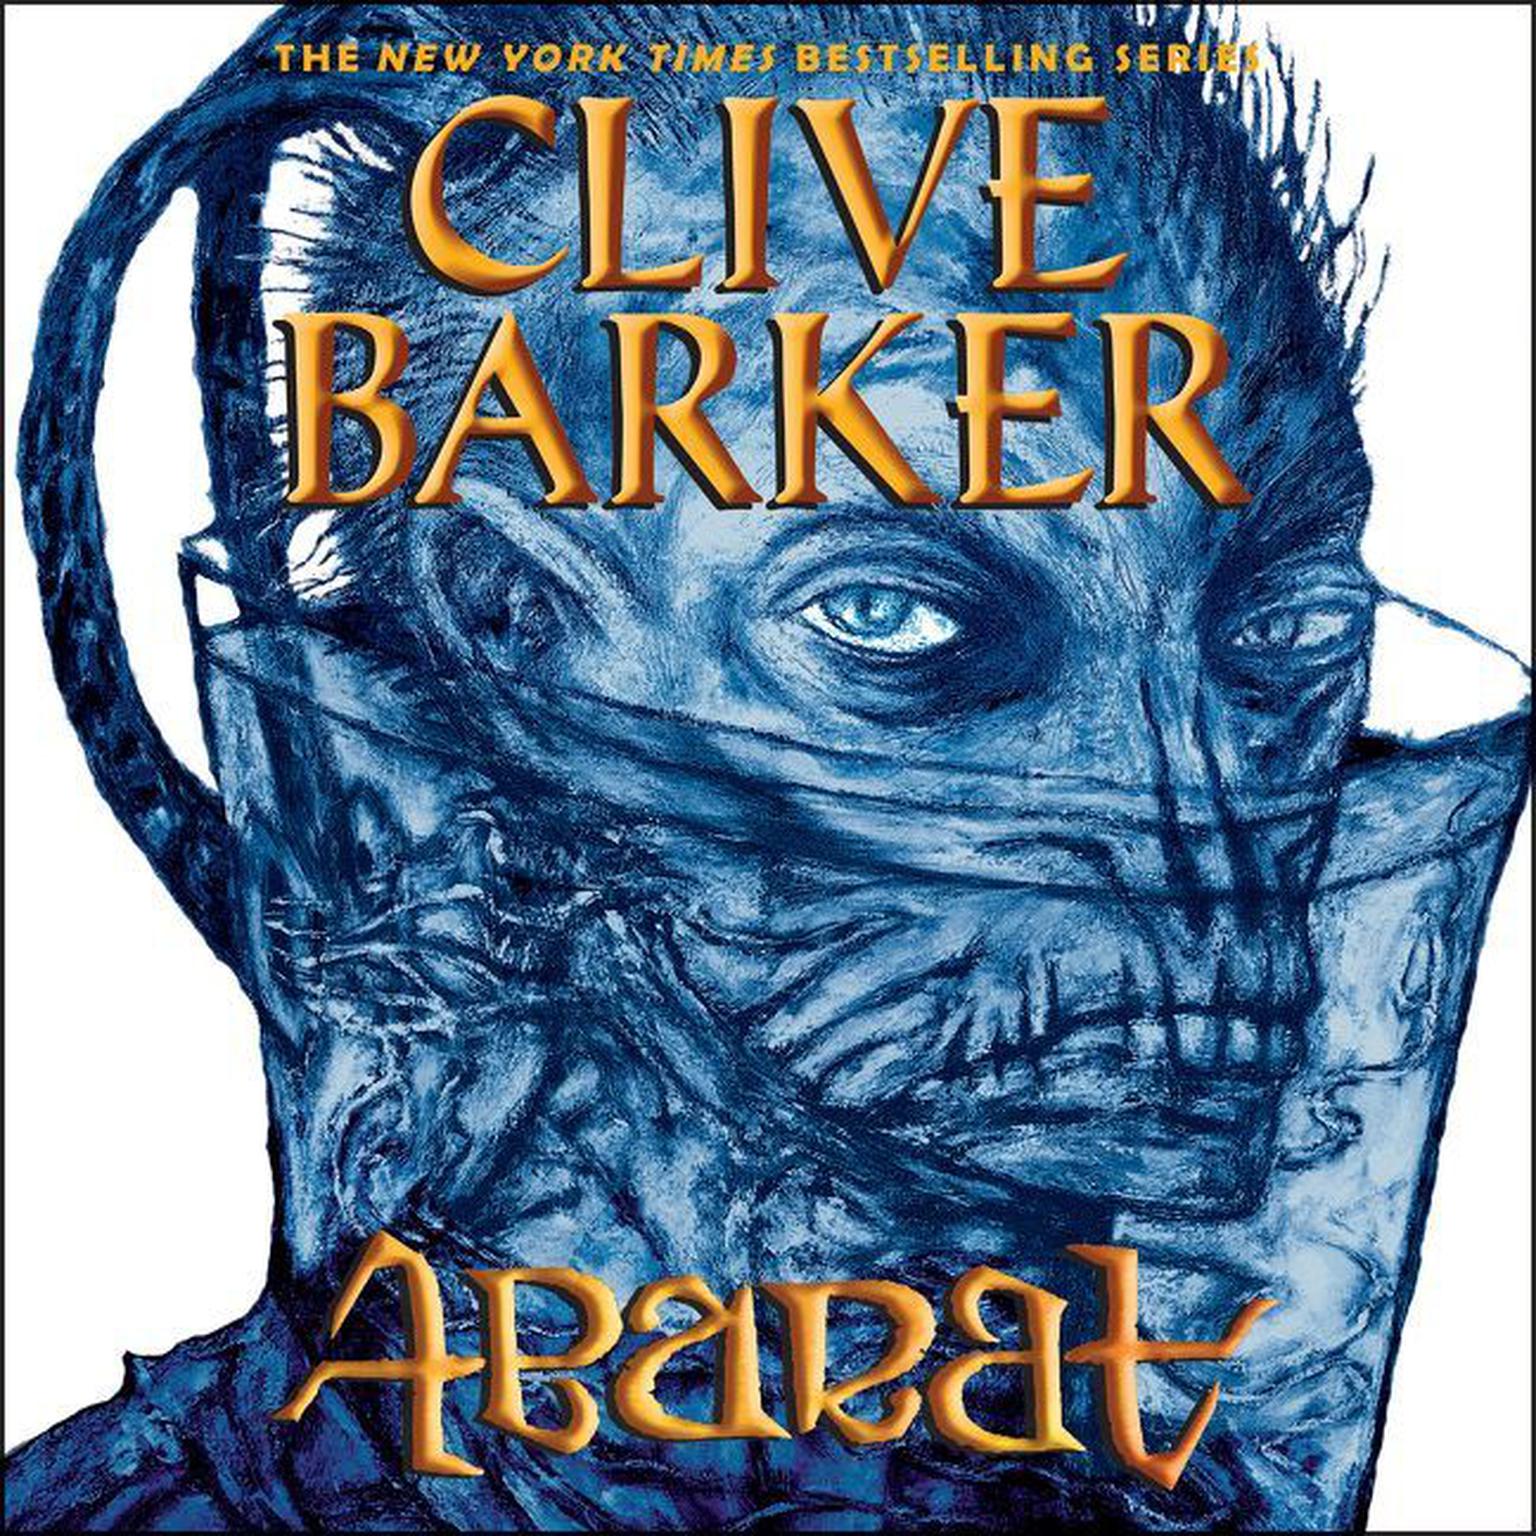 Abarat (Abridged) Audiobook, by Clive Barker